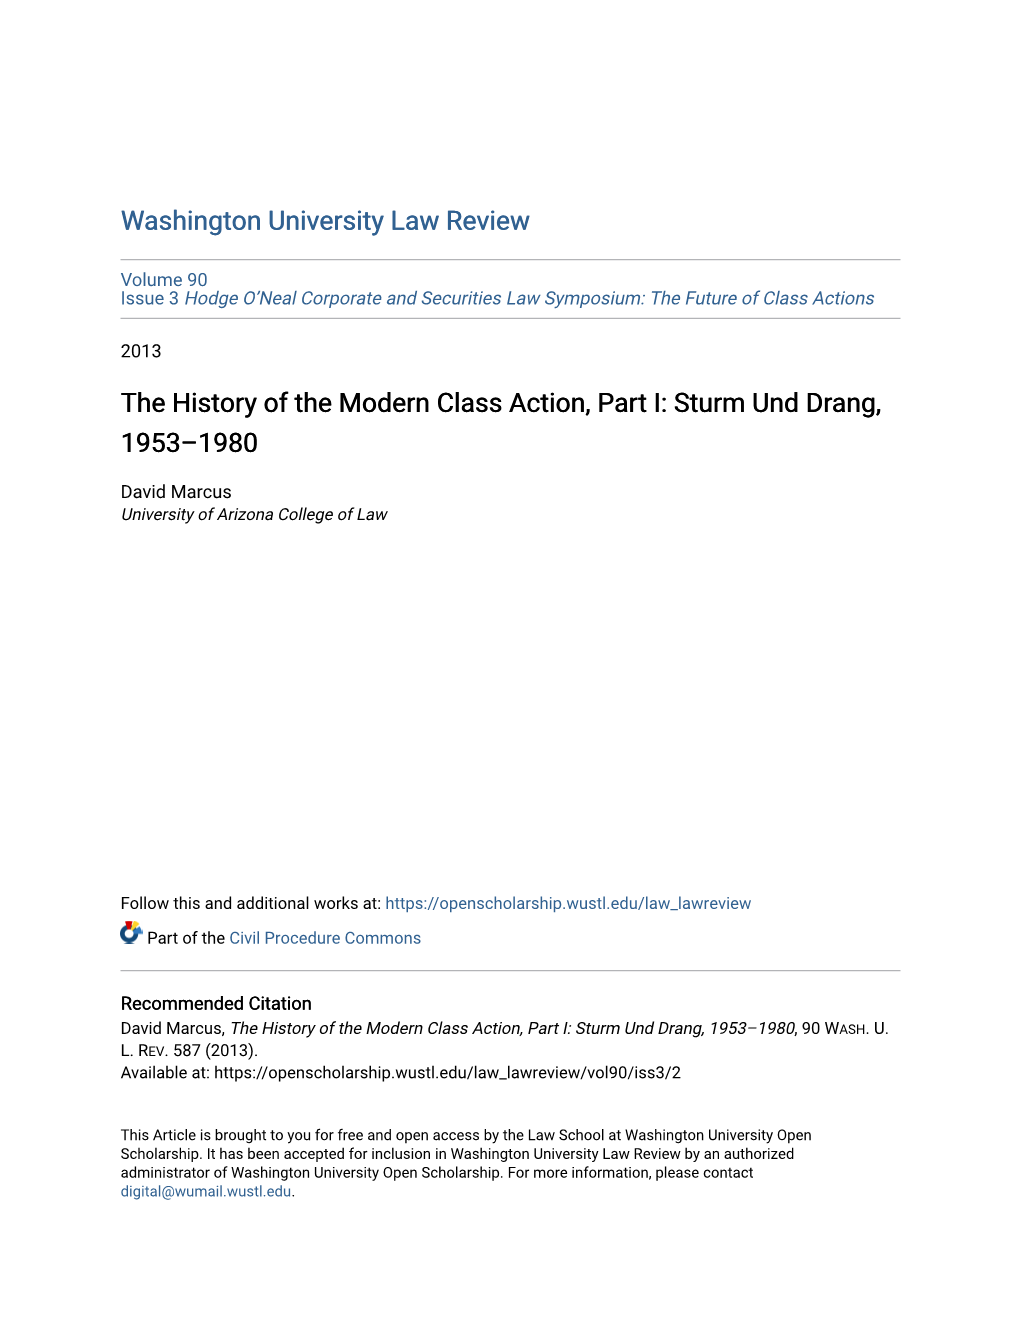 The History of the Modern Class Action, Part I: Sturm Und Drang, 1953–1980